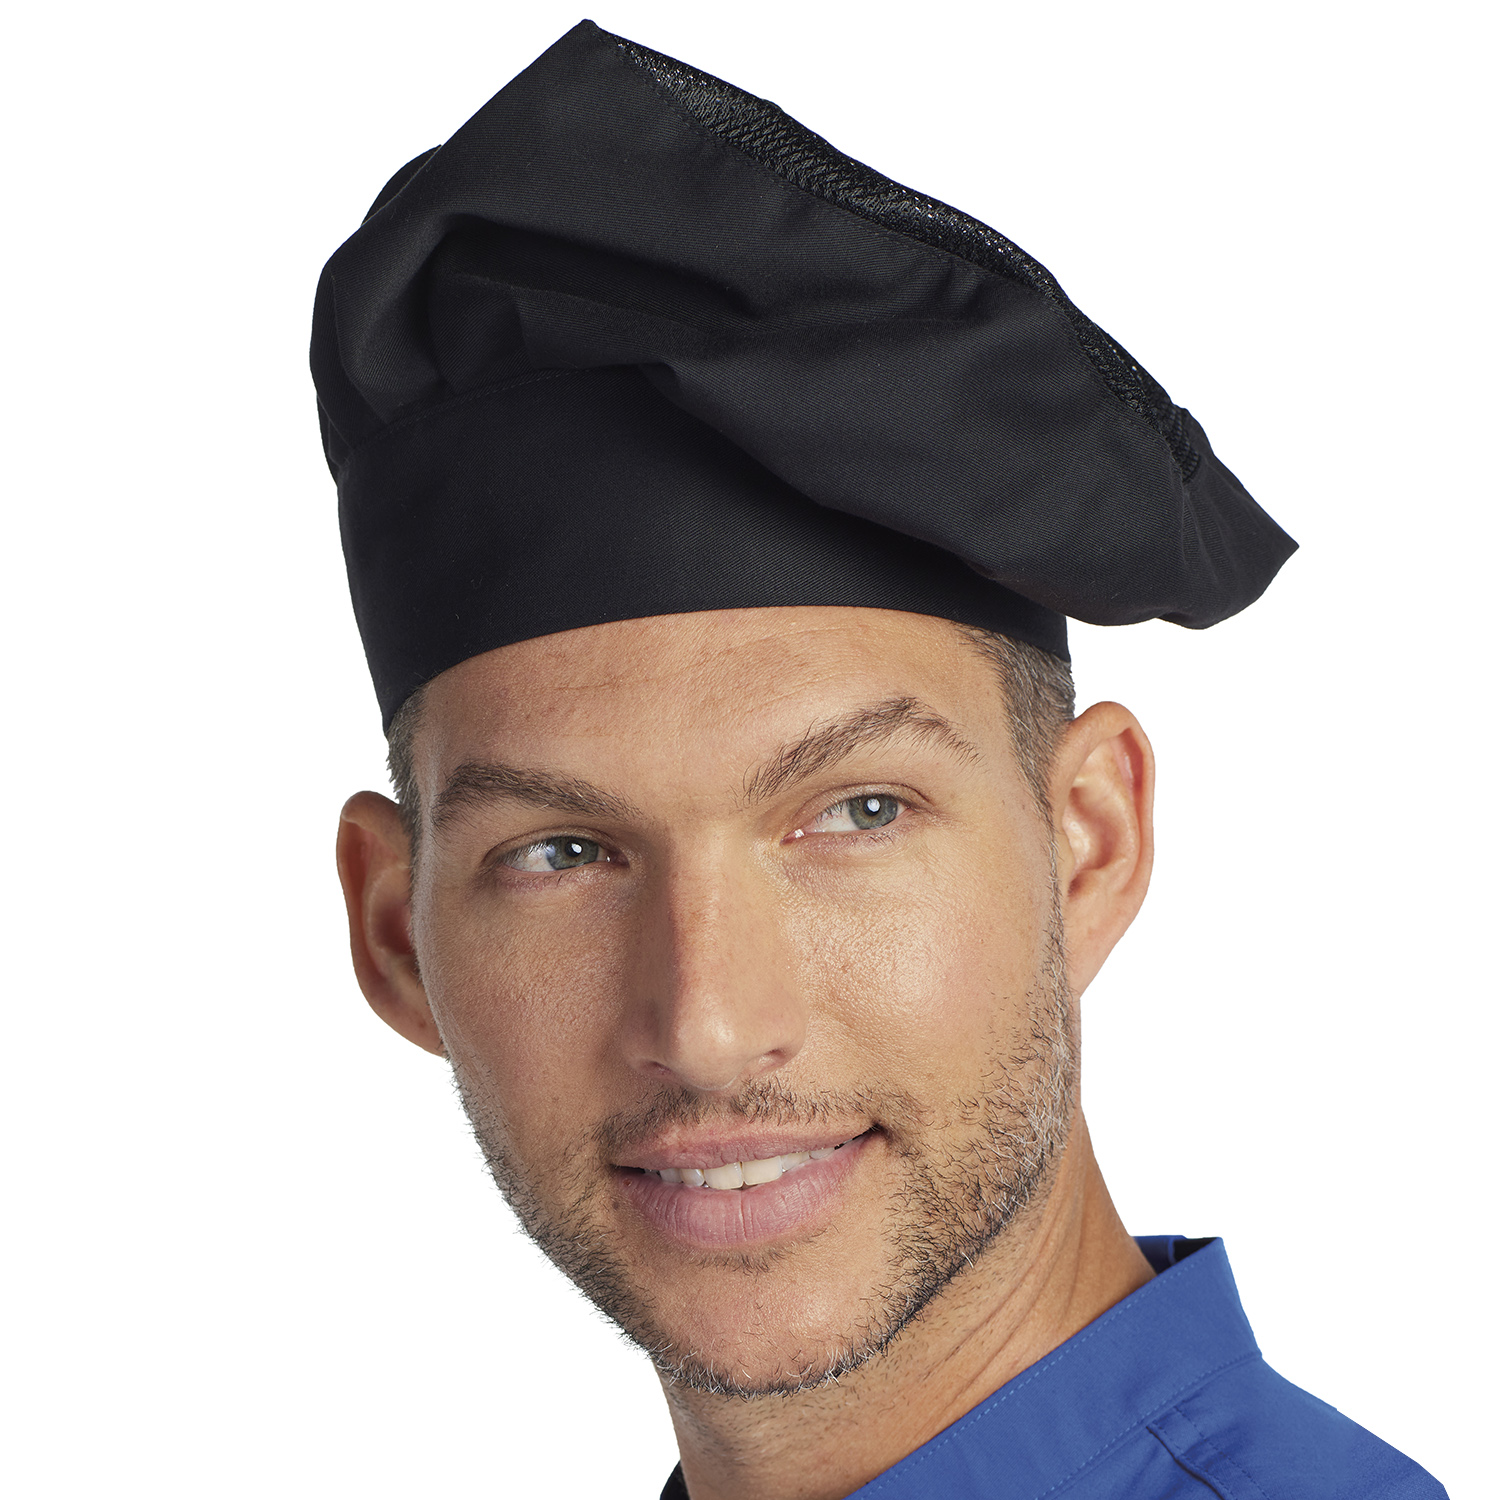 Chefwear&#39;s Toque chef, toques for chefs - CW1405-CW30_M_MALE_3090_web